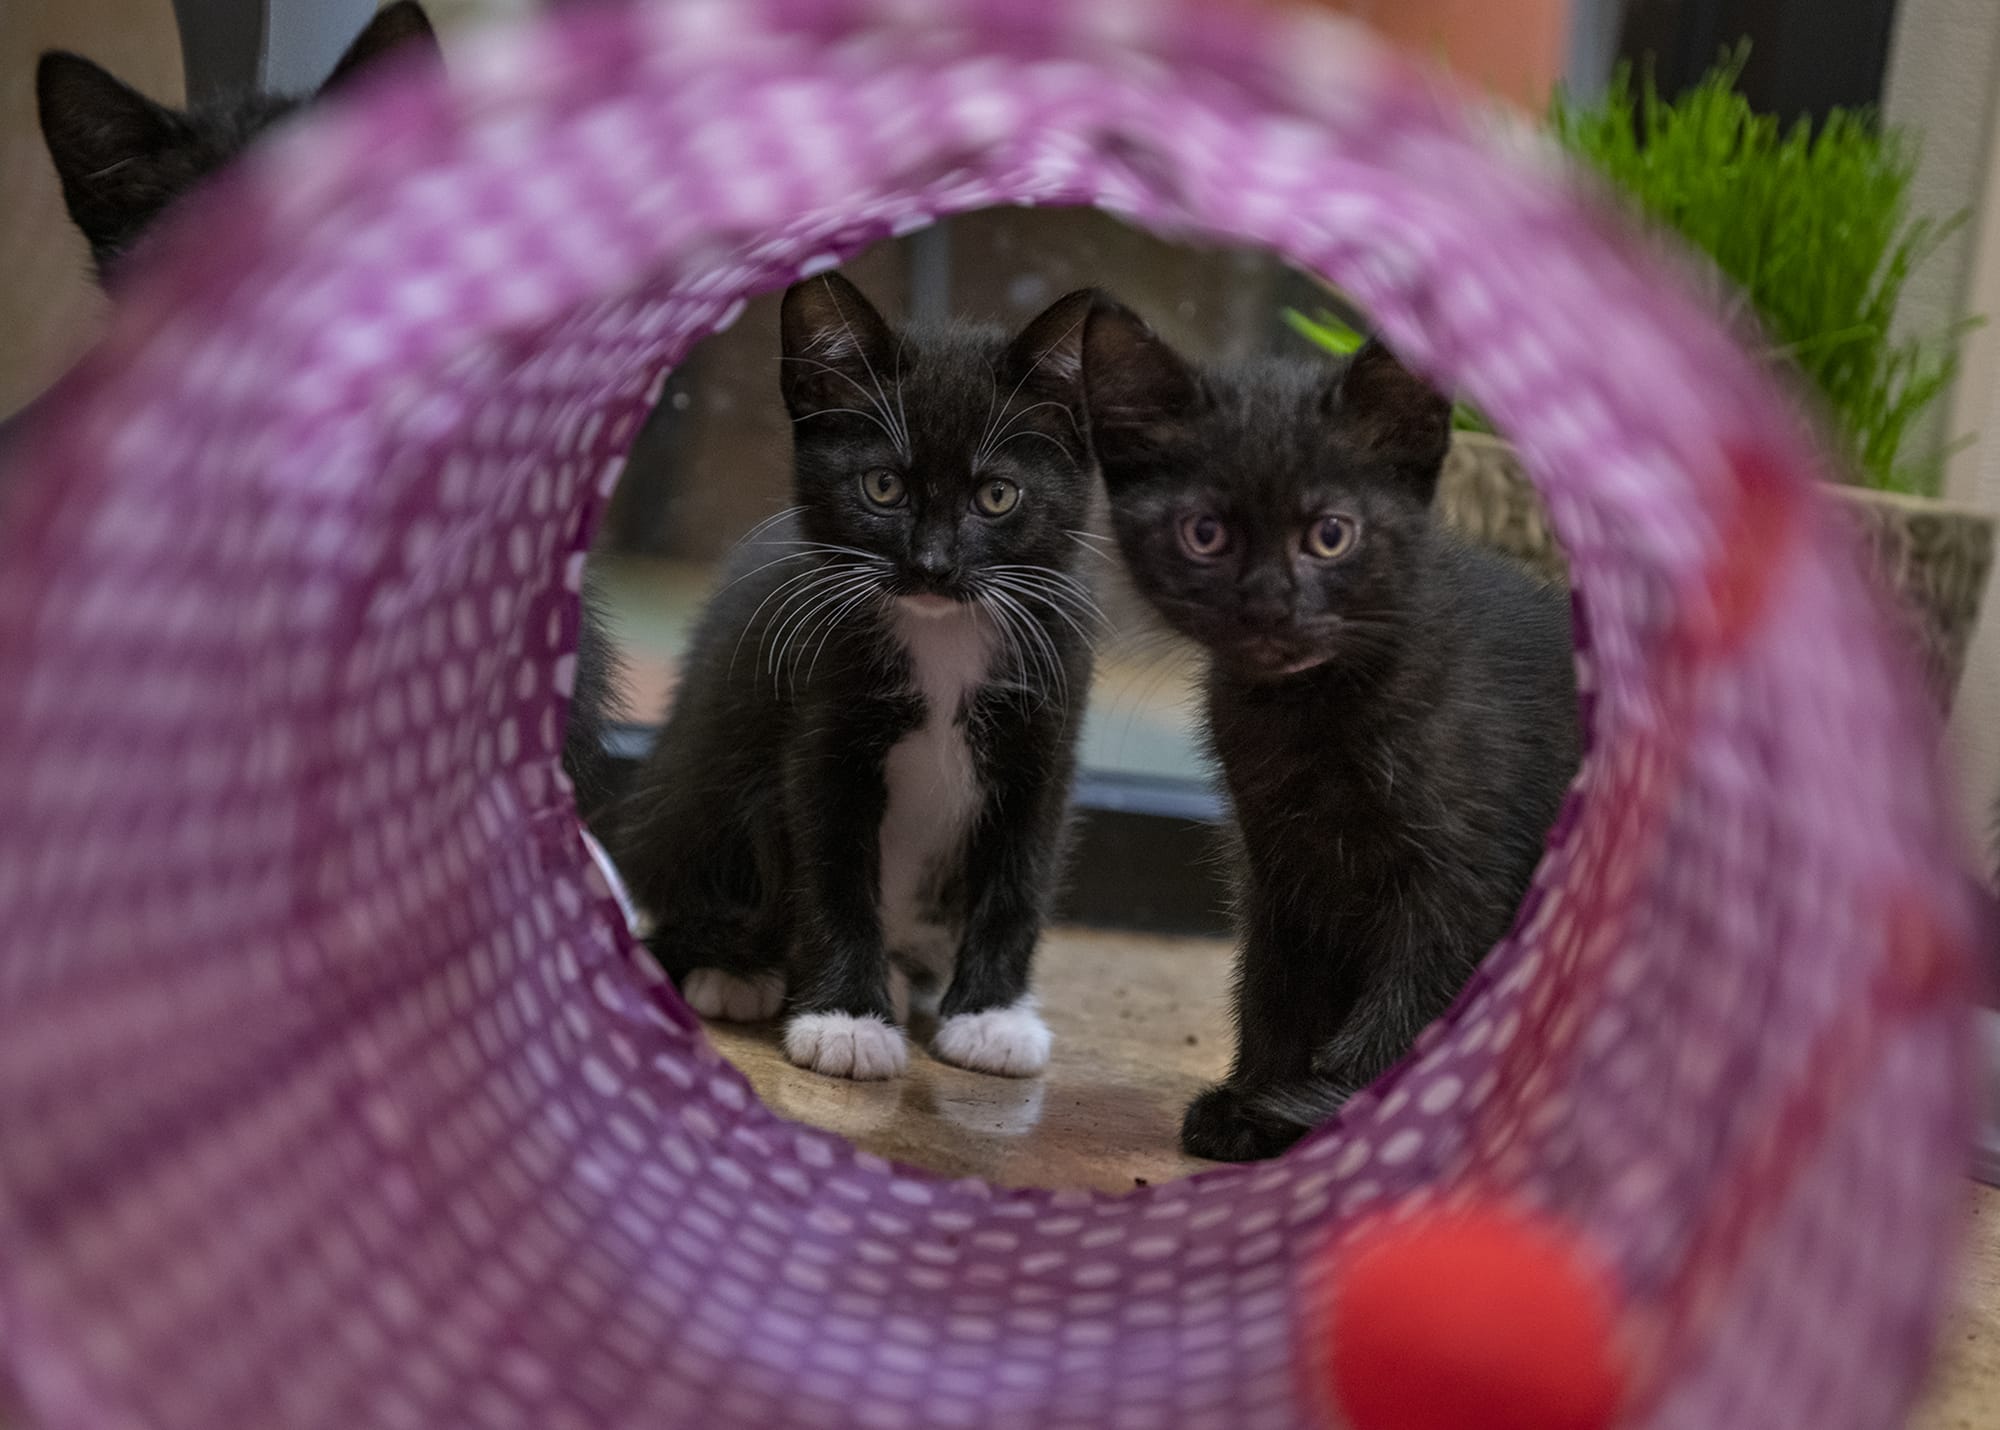 Two eight-week-old kittens wake up from a nap to play at the Humane Society for Southwest Washington in Vancouver on Tuesday afternoon, July 16, 2019.